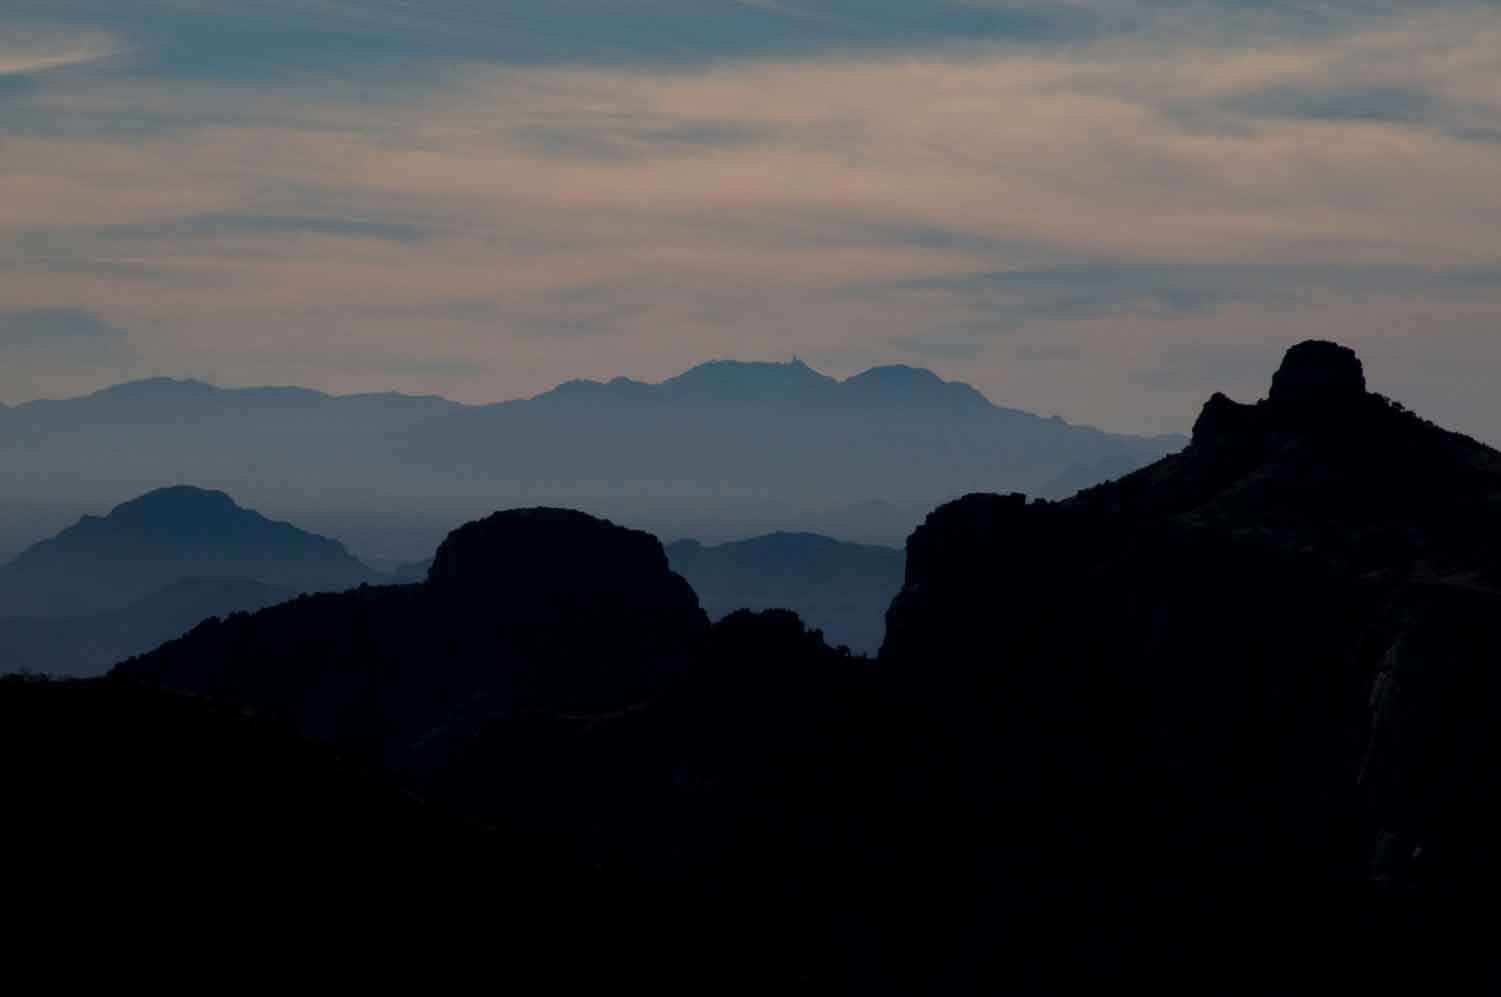 Distant southern Arizona mountain ranges as seen from high in the Santa Catalina Mts. north of Tucson